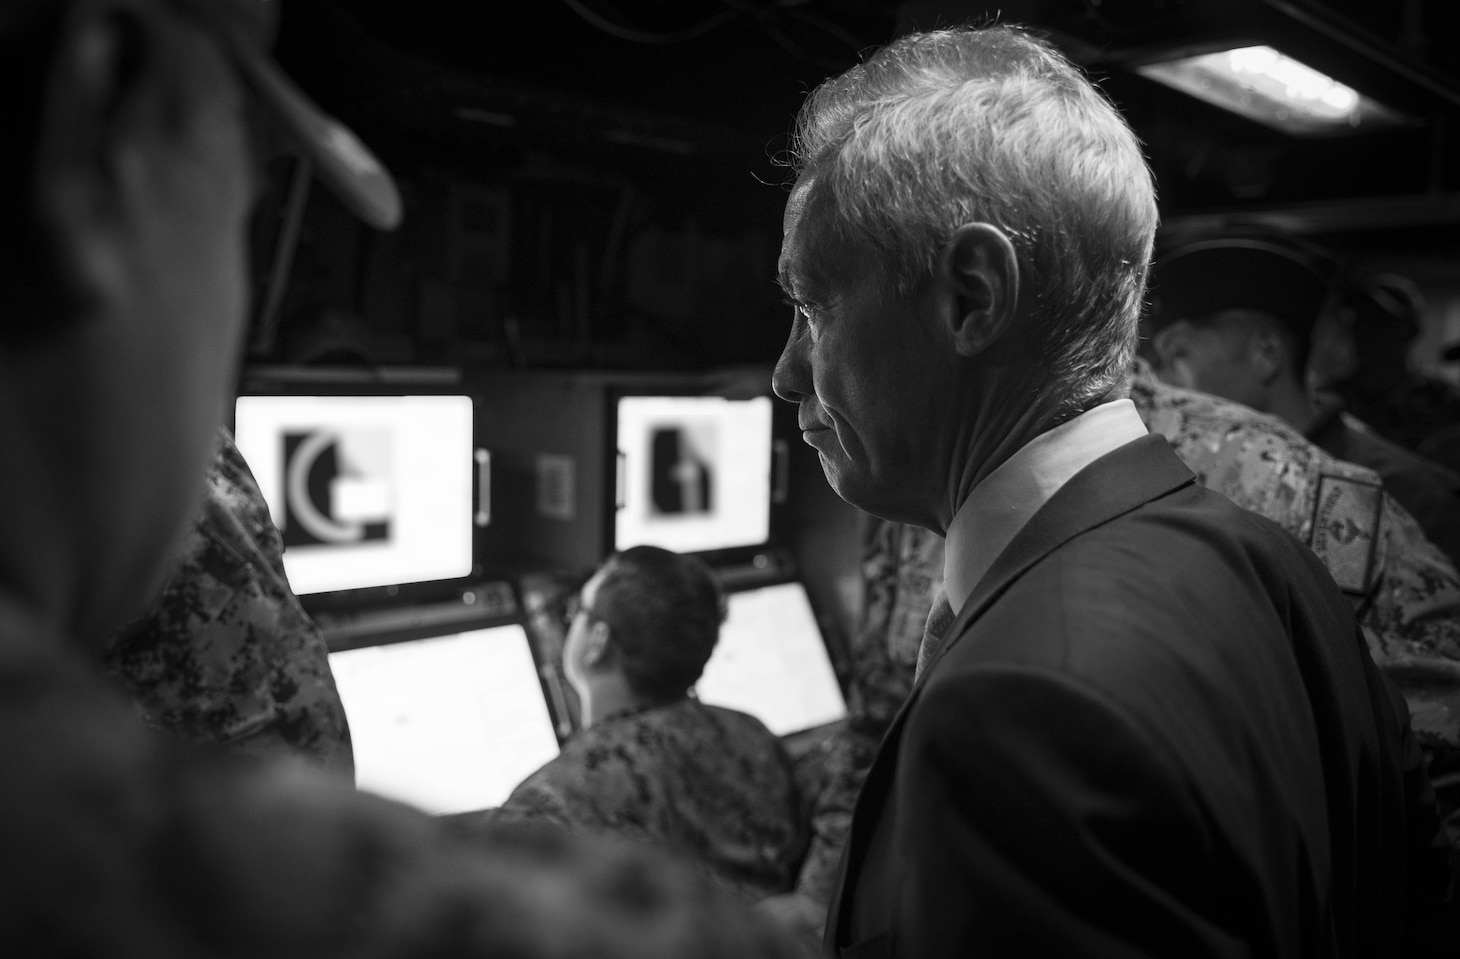 240328-N-SF508-1174 YOKOSUKA, Japan (March 28, 2024) U.S. Ambassador to Japan, Rahm Emanuel, observes tomahawk land attack missile training with members of the Japan Maritime Self-Defense Force aboard the Arleigh Burke-class guided-missile destroyer USS McCampbell (DDG 85) at Commander, Fleet Activities Yokosuka, March 28. U.S. 7th Fleet is the U.S. Navy's largest forward-deployed numbered fleet, and routinely interacts and operates with allies and partners in preserving a free and open Indo-Pacific region. (U.S. Navy Photo Illustration by Mass Communication Specialist 1st Class Charles Oki)